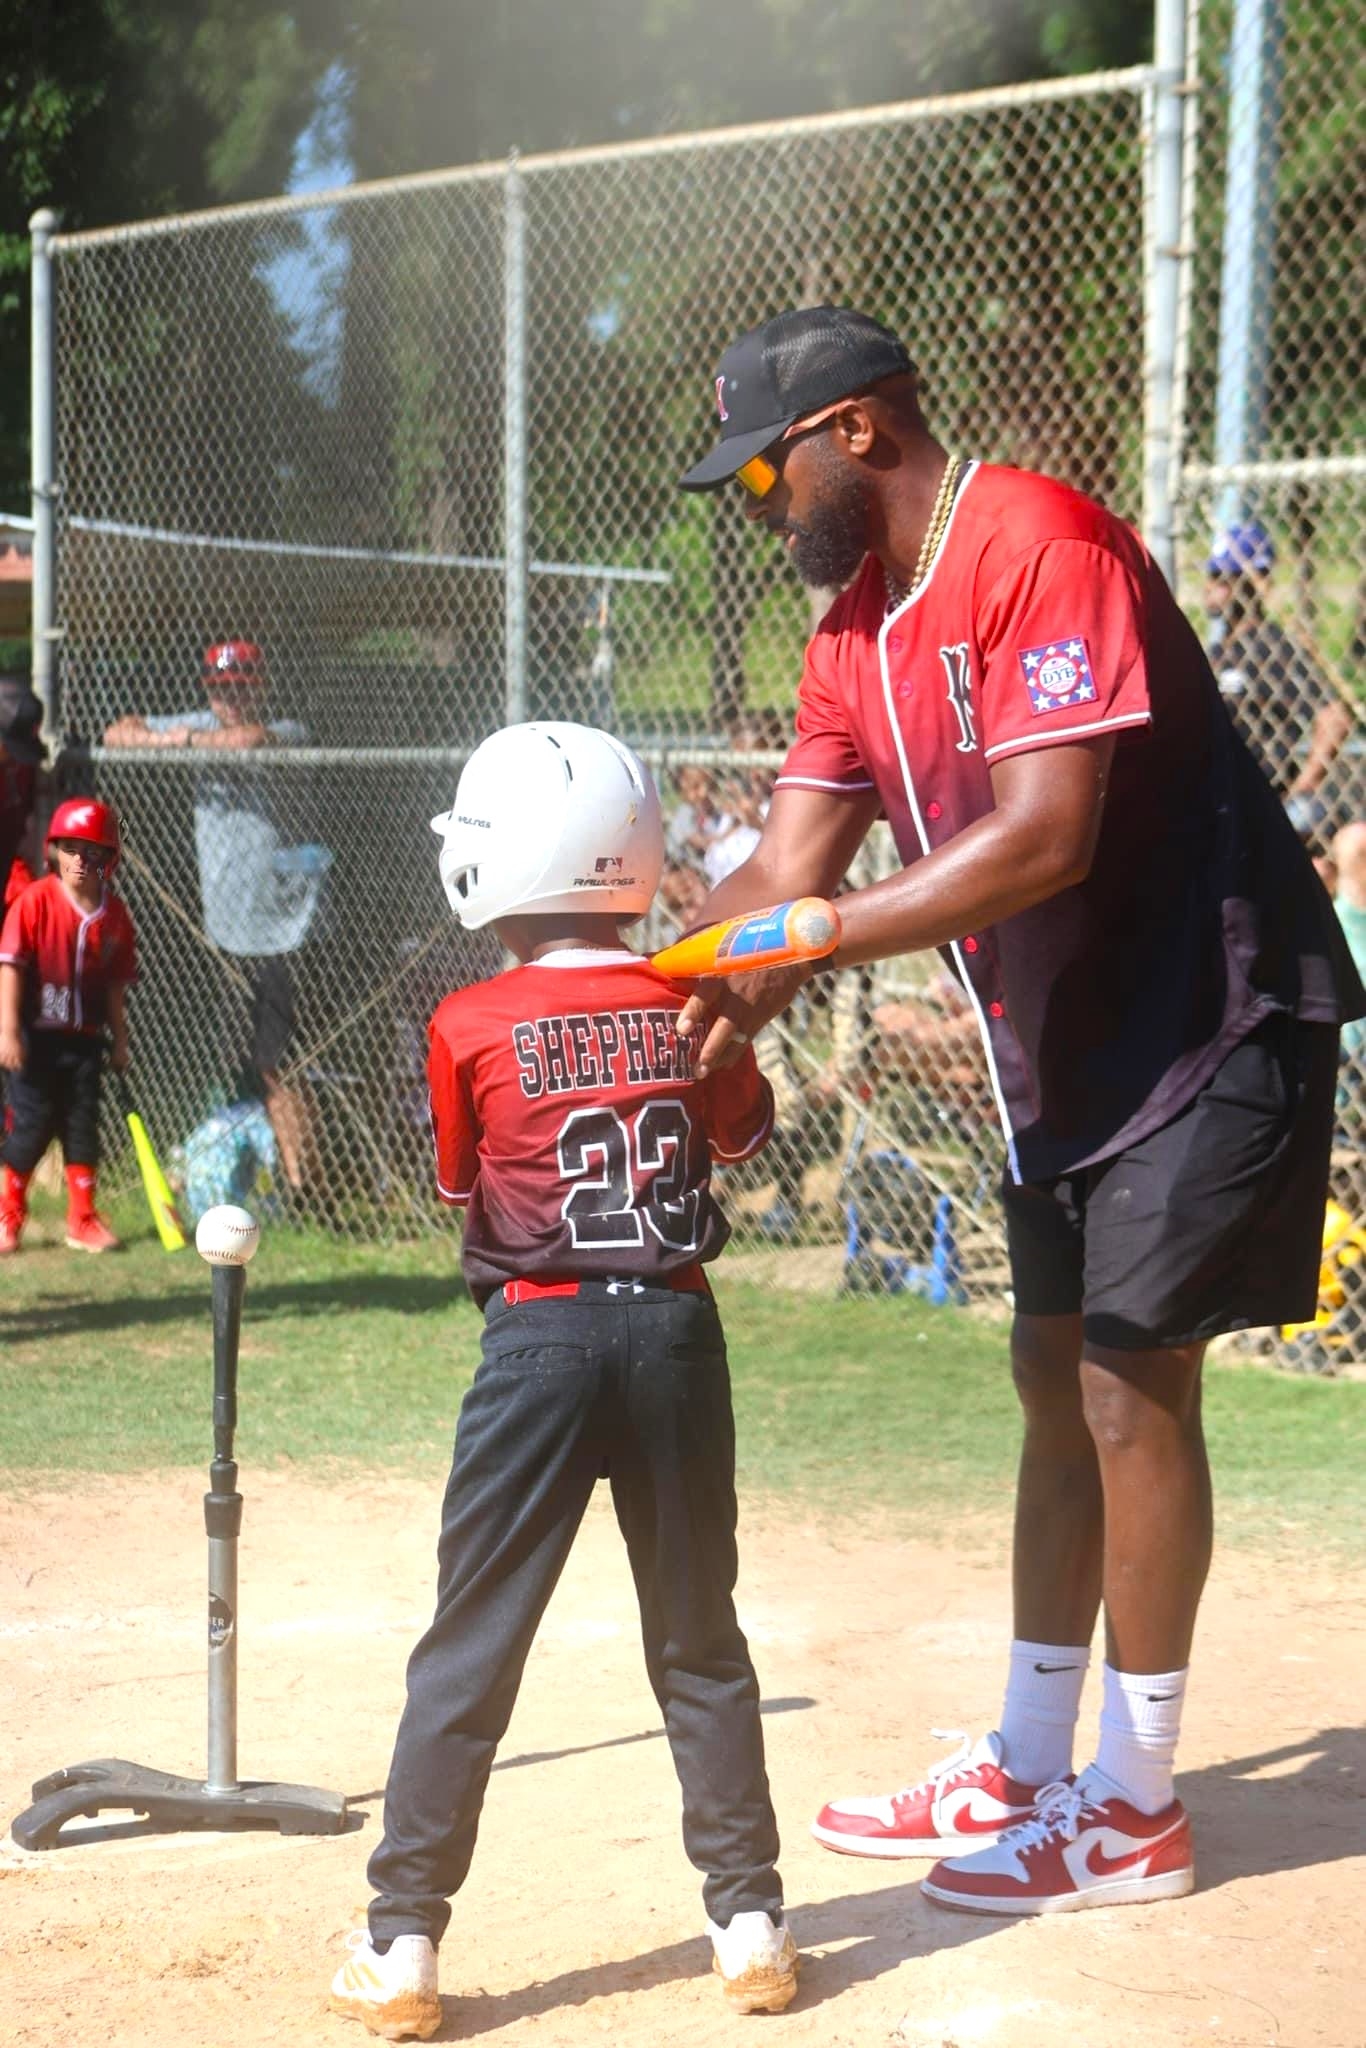 Kilgore T-Ball All-Star Jaylen Shepherd (23) gets some instruction before an at-bat from a familiar coach, Jaron Shepherd. This photo is by Renita Dickey from Twinn2 Photography, and see more of her work on her Facebook page of that same name! (Photo by RENITA DICKEY - SPECIAL TO ETBLITZ.COM)